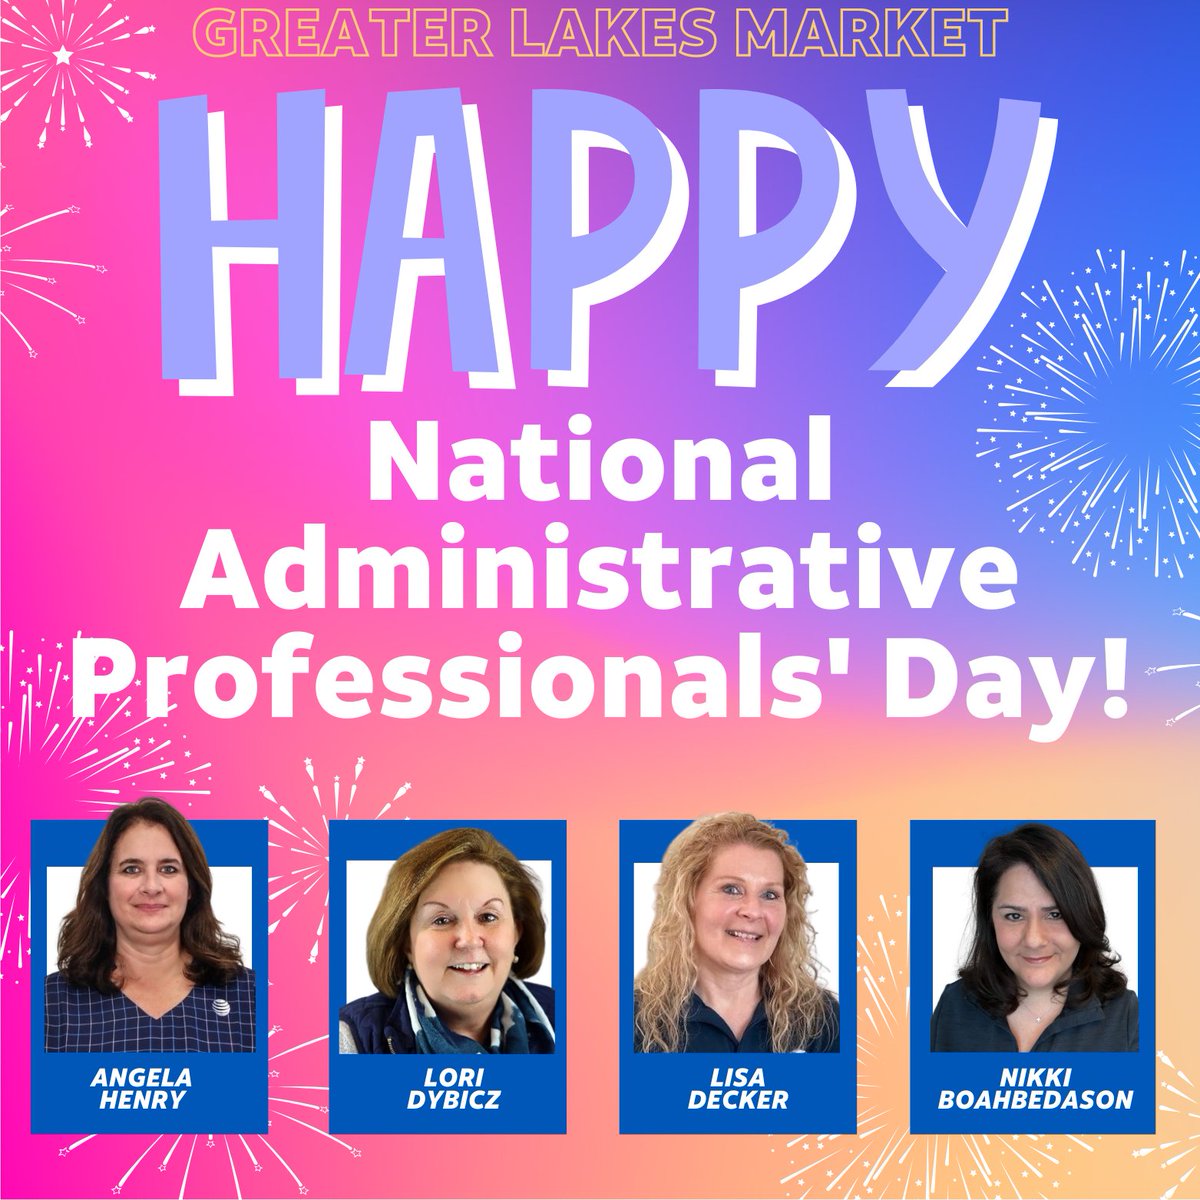 Happy Administrative Professionals' Day to our FABULOUS team in GLM! We wanted to give you all a very special shoutout for all of the hard work you have done, and continue to do daily! It does not go unnoticed 🤩🫶 #MakingWaves